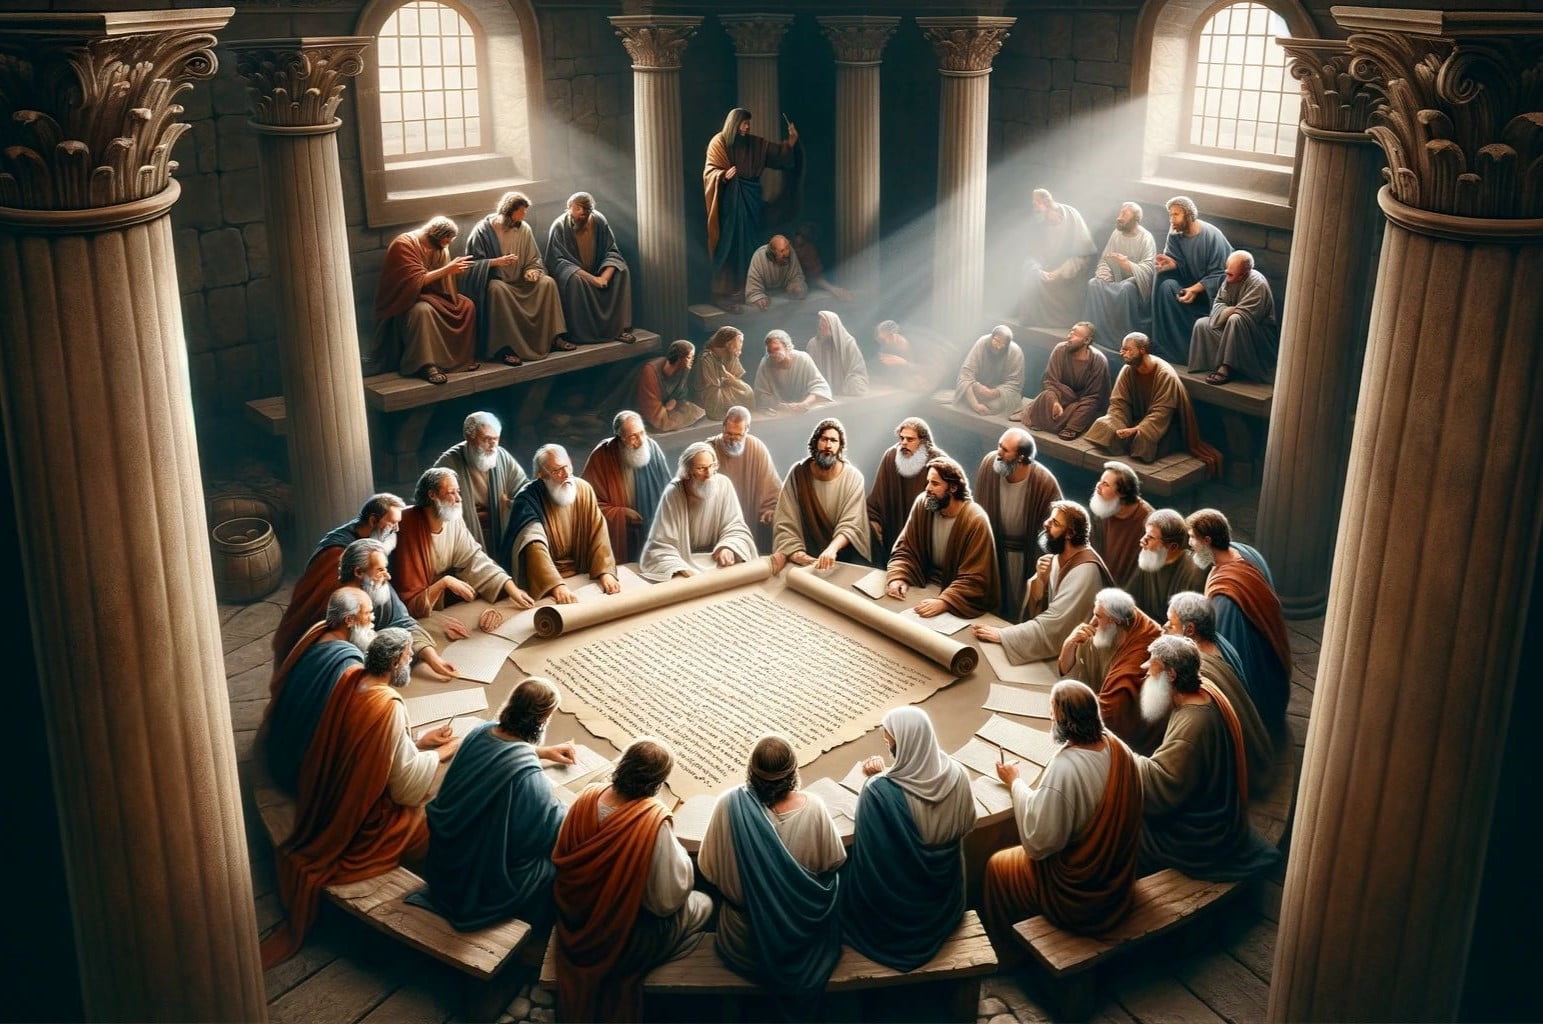 35-facts-about-the-apostles-creed